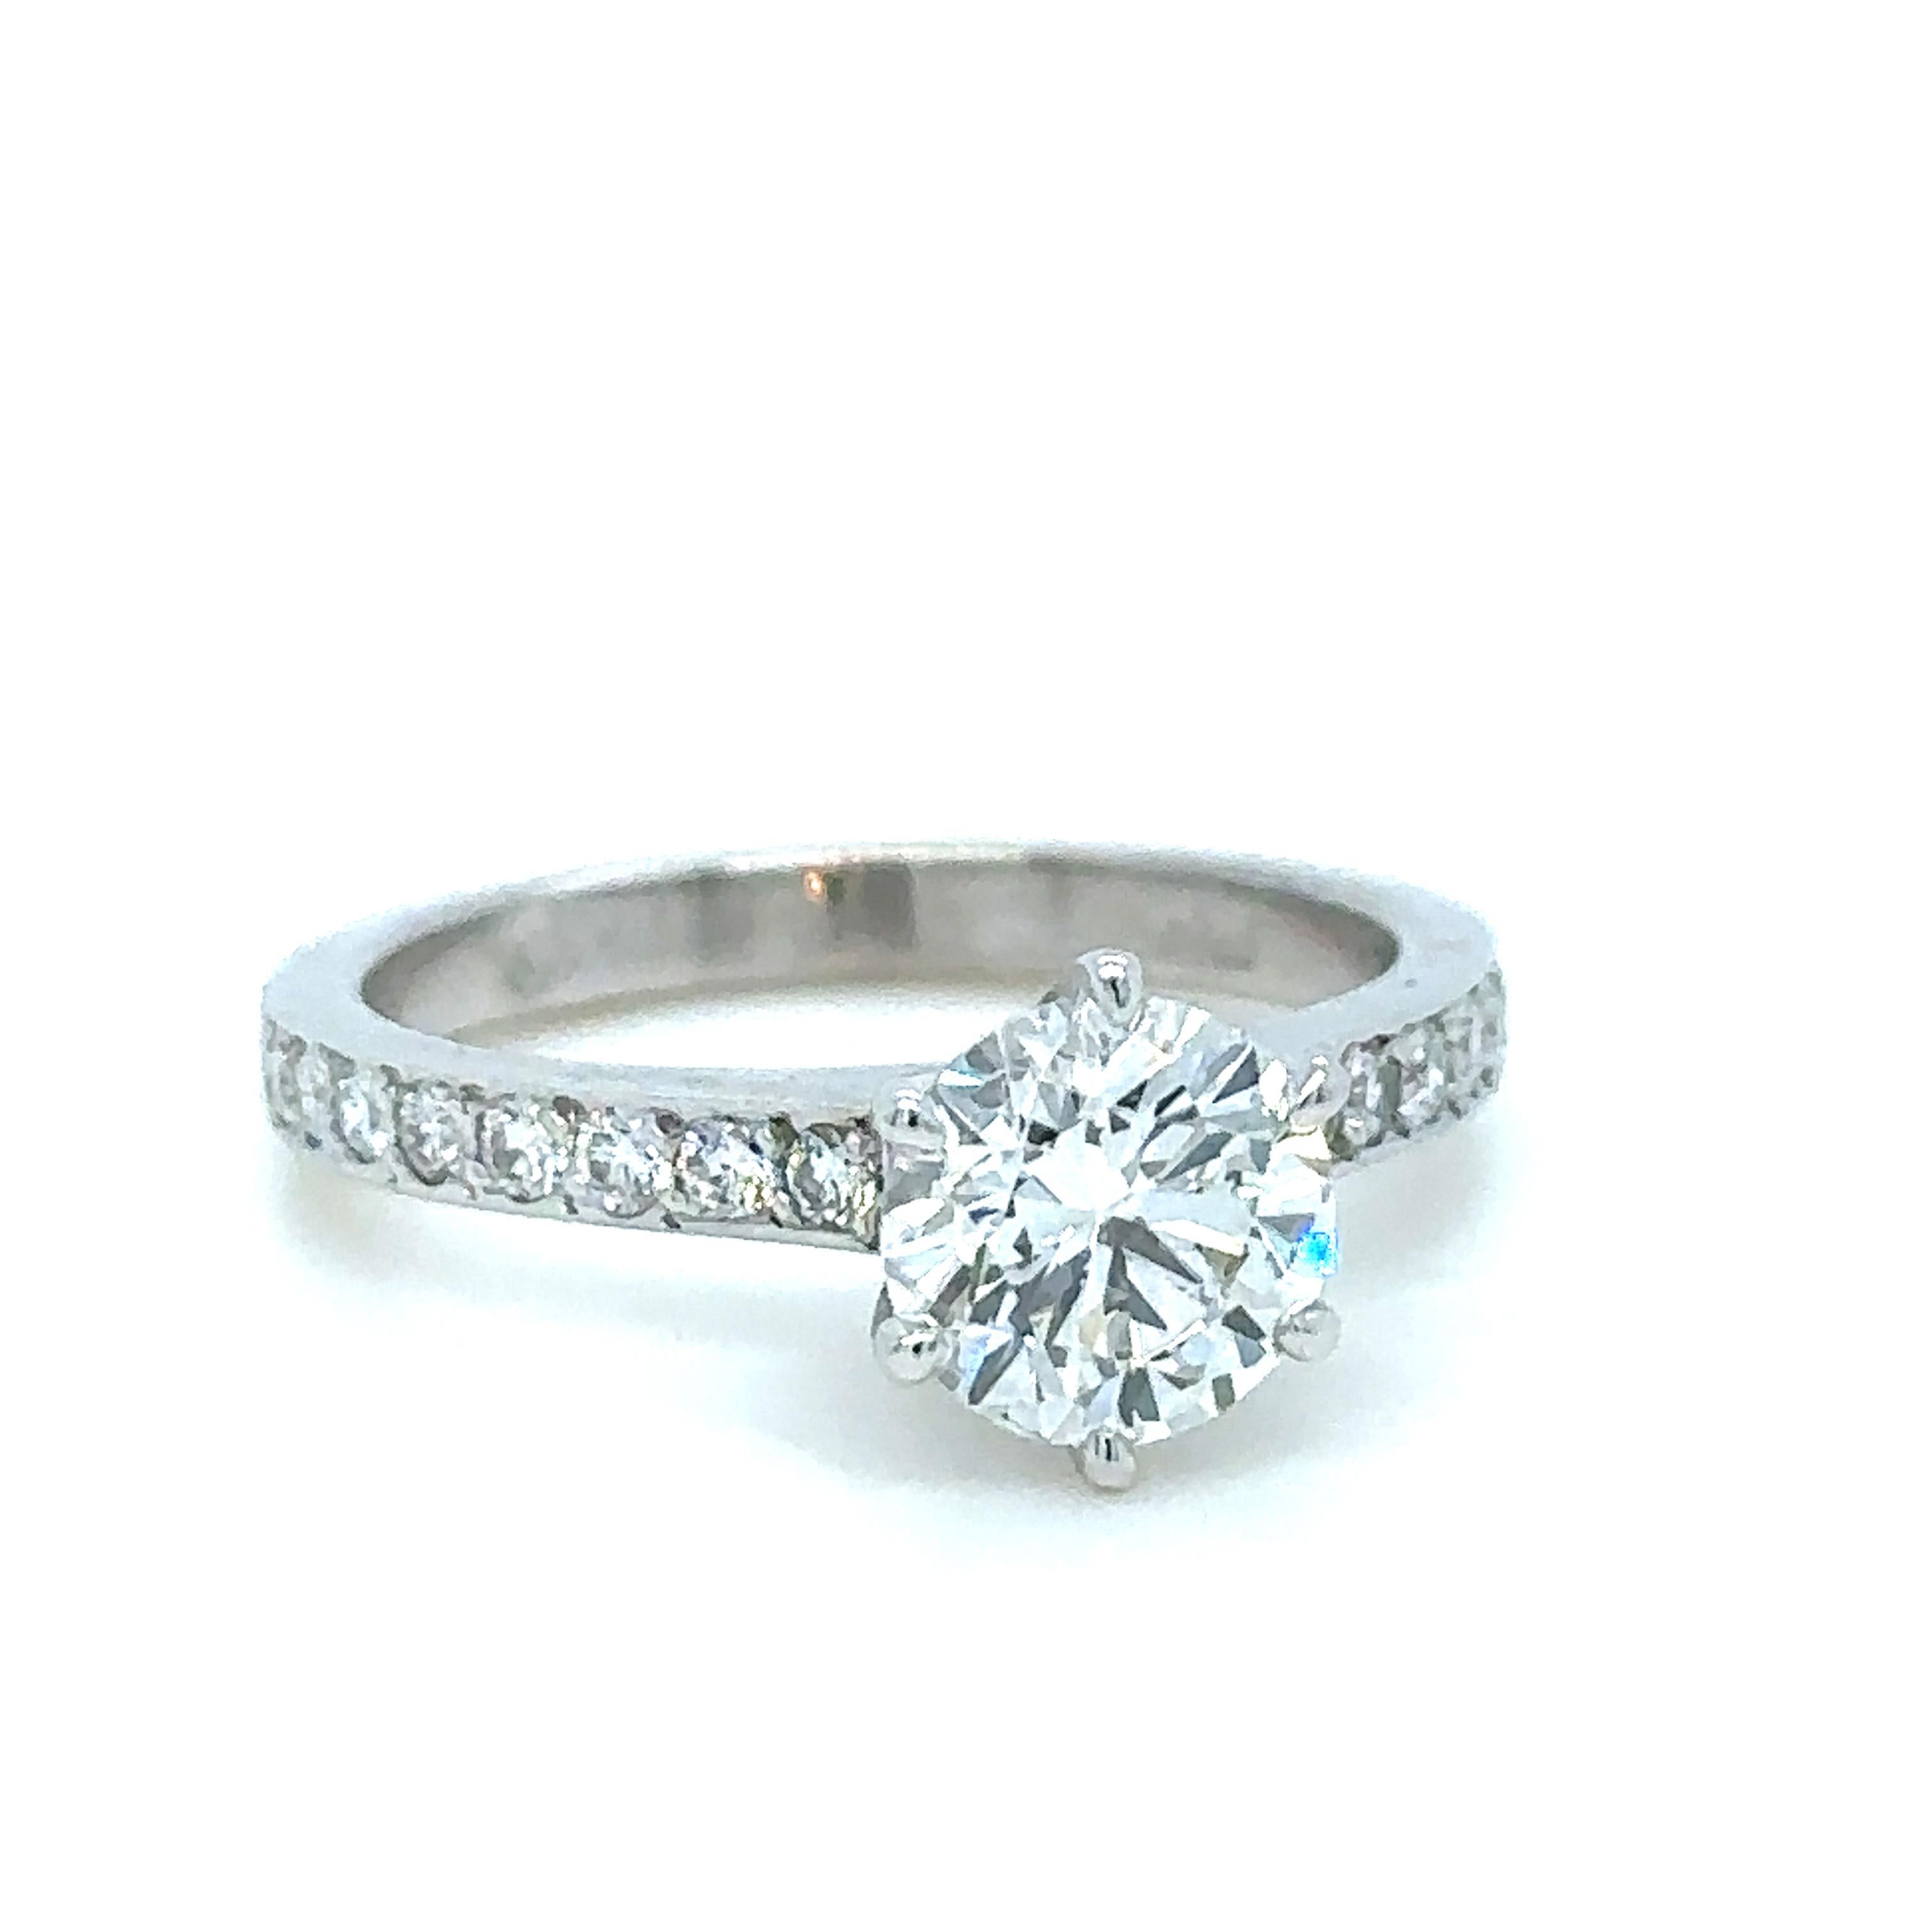 Unique features:

Paul Bram Diamond Engagement Ring.

l x 18ct white gold ring with one round brilliant cut diamond weighing 1.02ct, in 6-claw setting, flanked by sixteen round brilliant cut diamonds weighing a total of 0.23ct (colour: F, clarity: